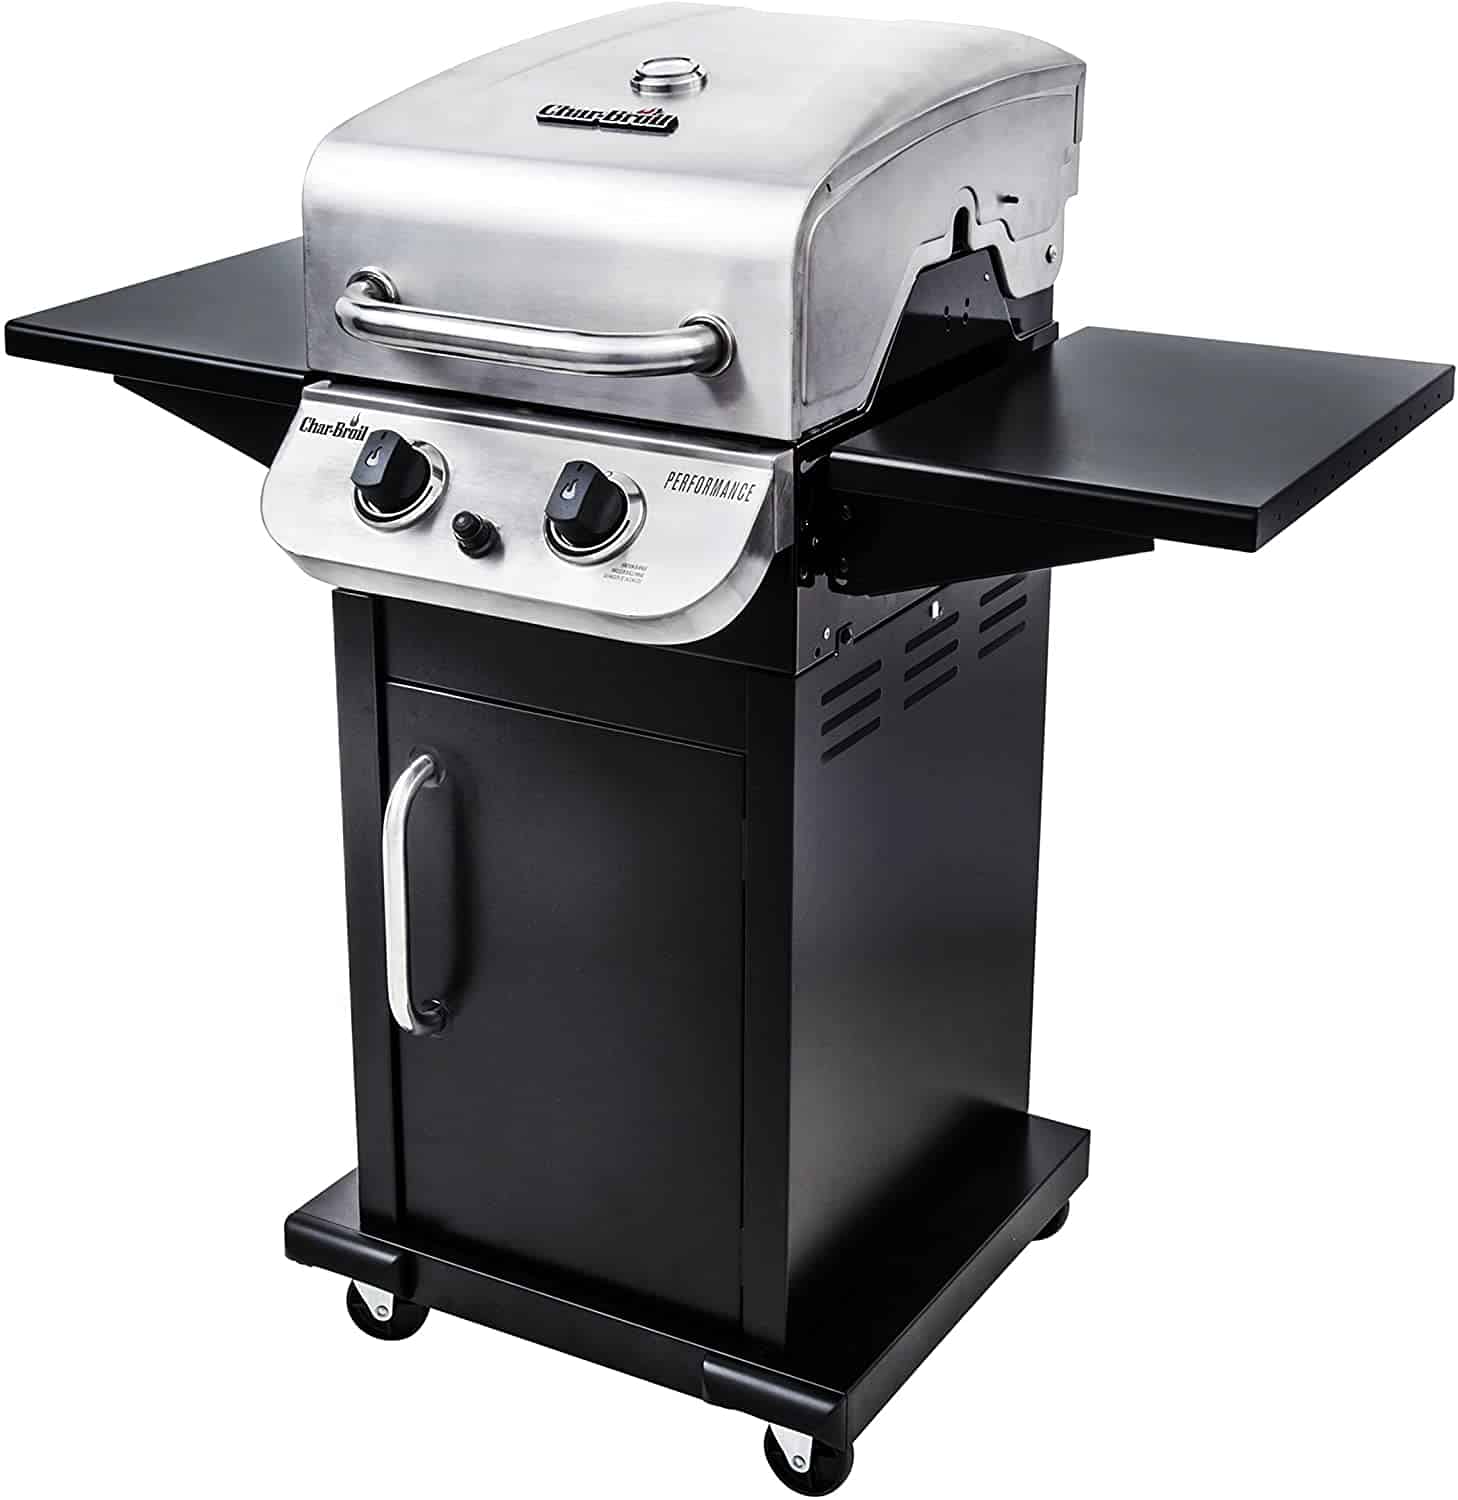 Best low-budget gas grill- Char-Broil Performance 300